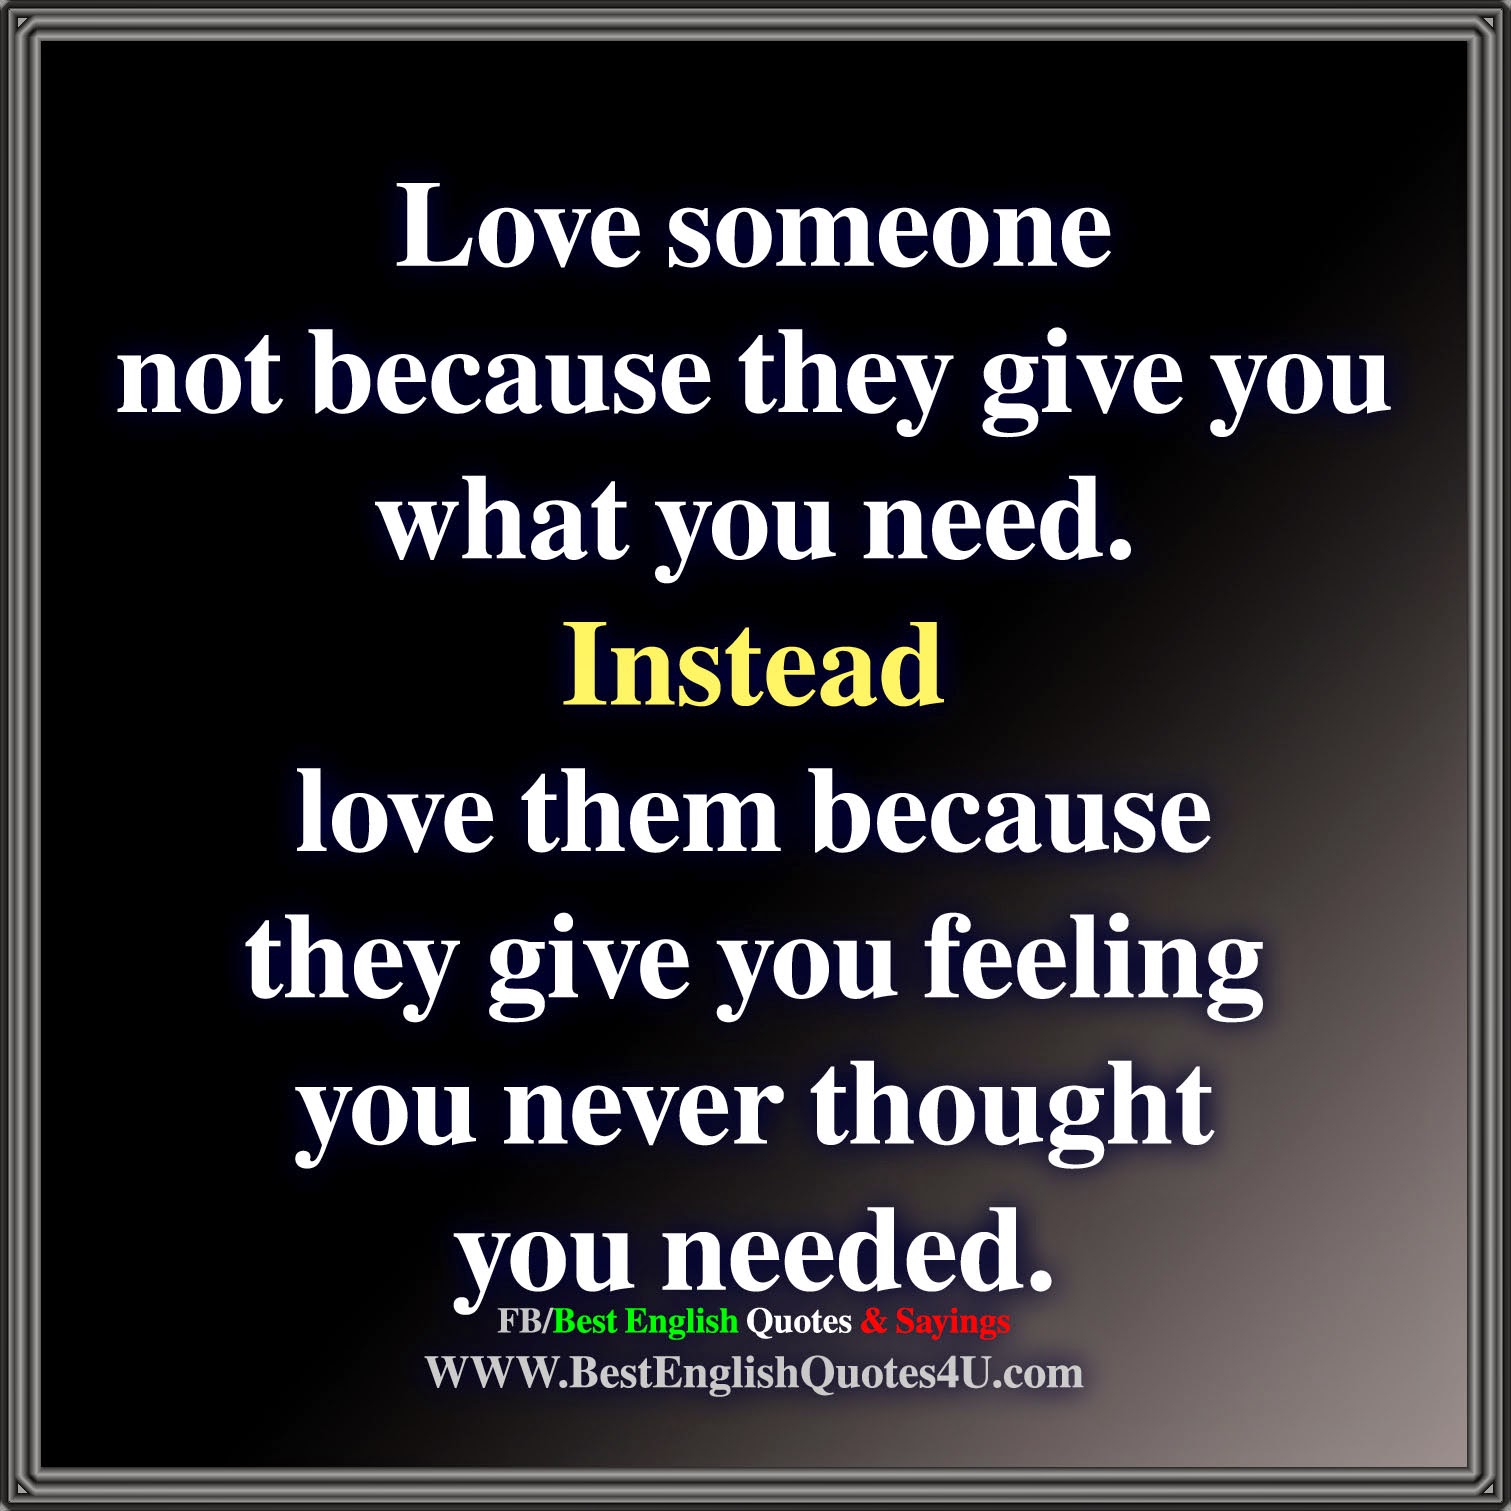 Love someone not because they give you what you need Instead